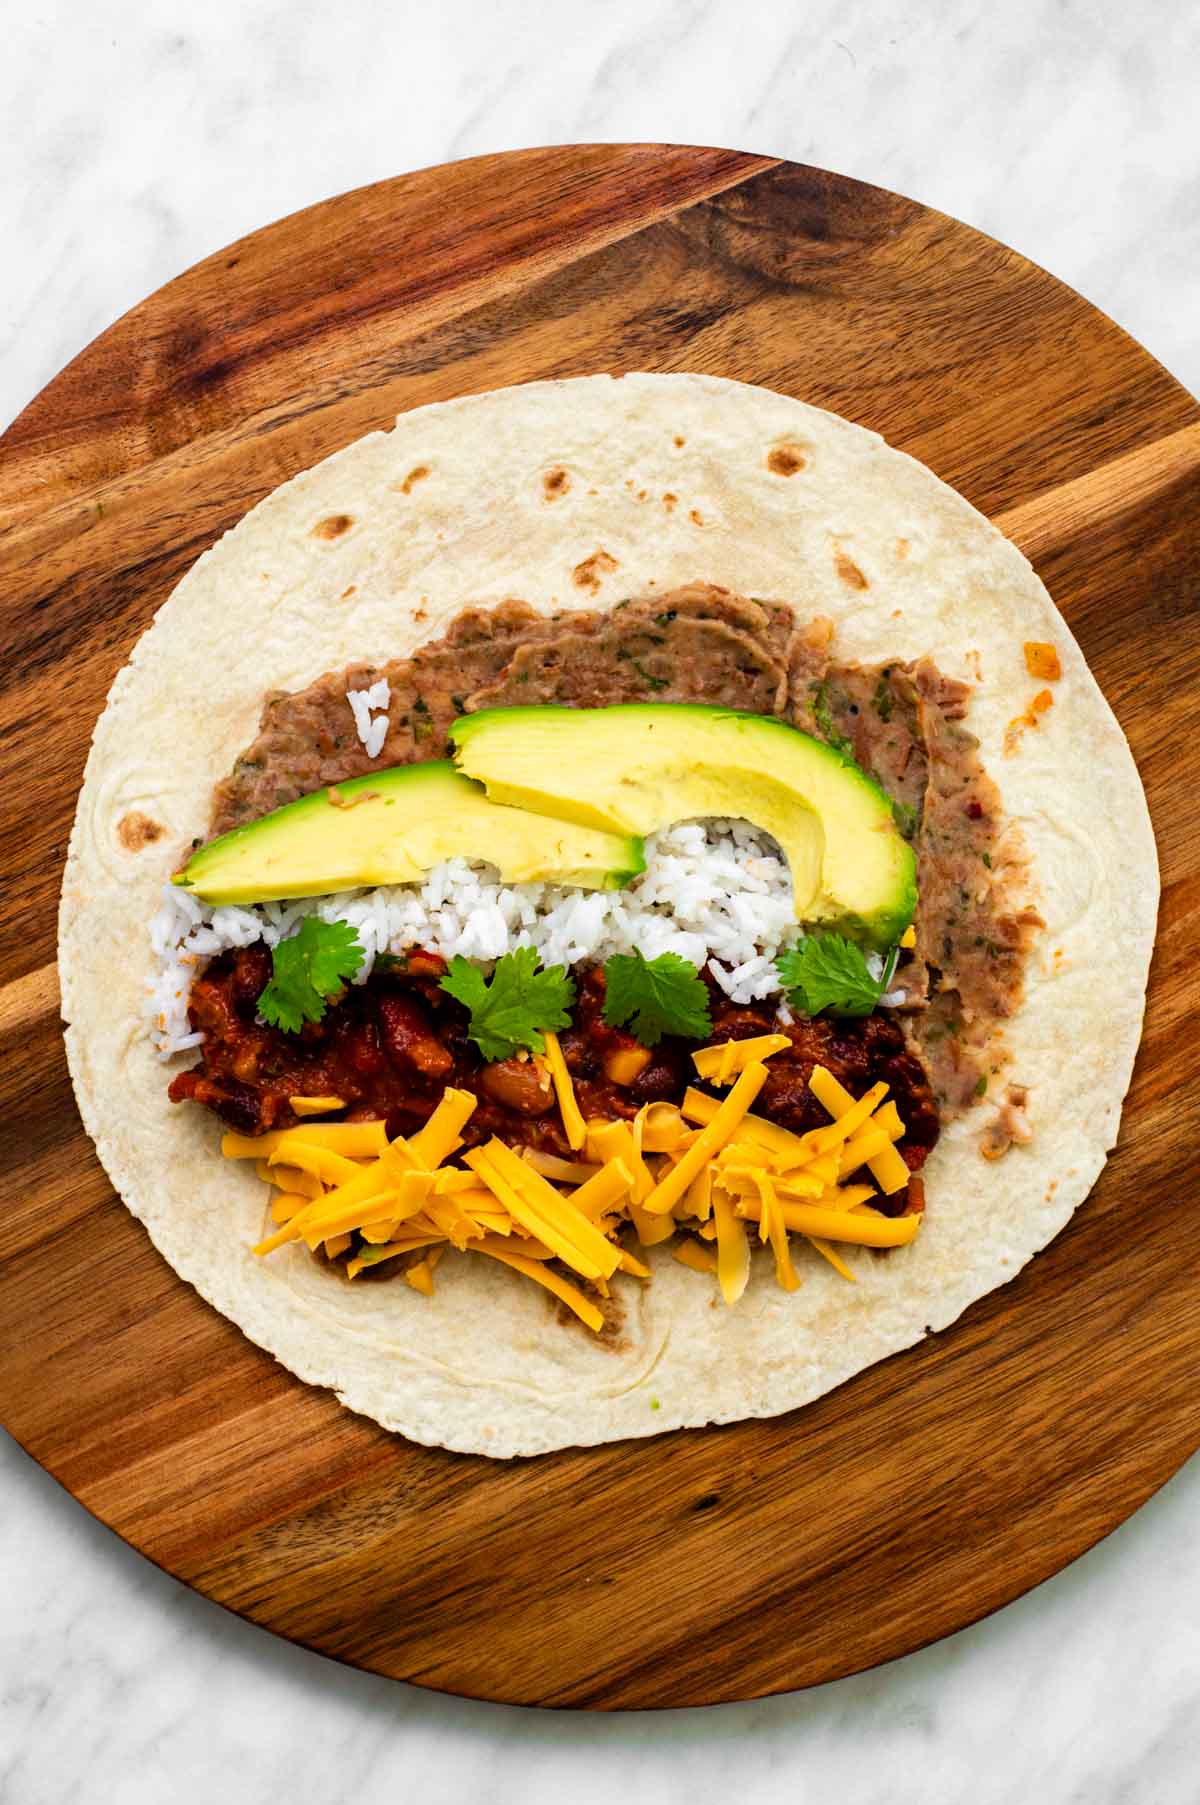 The tortilla topped with refried beans, chili, cheese, avocado, rice, and cilantro.